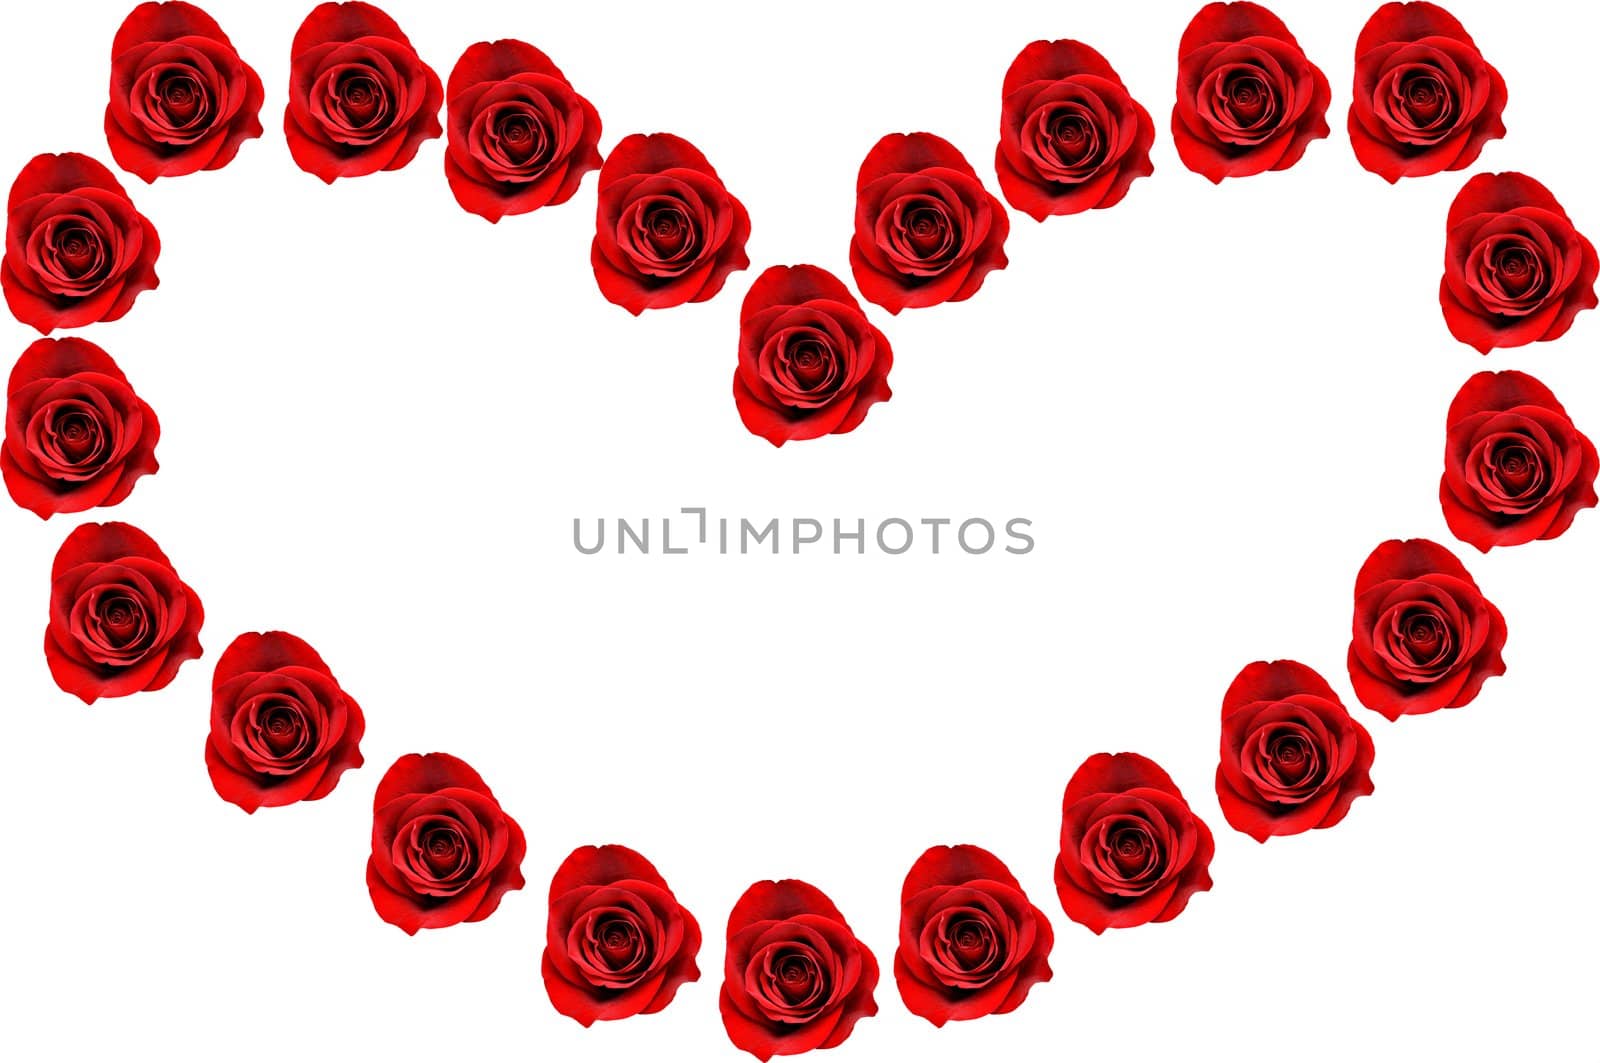 Roses in heart shape isolated on white background.